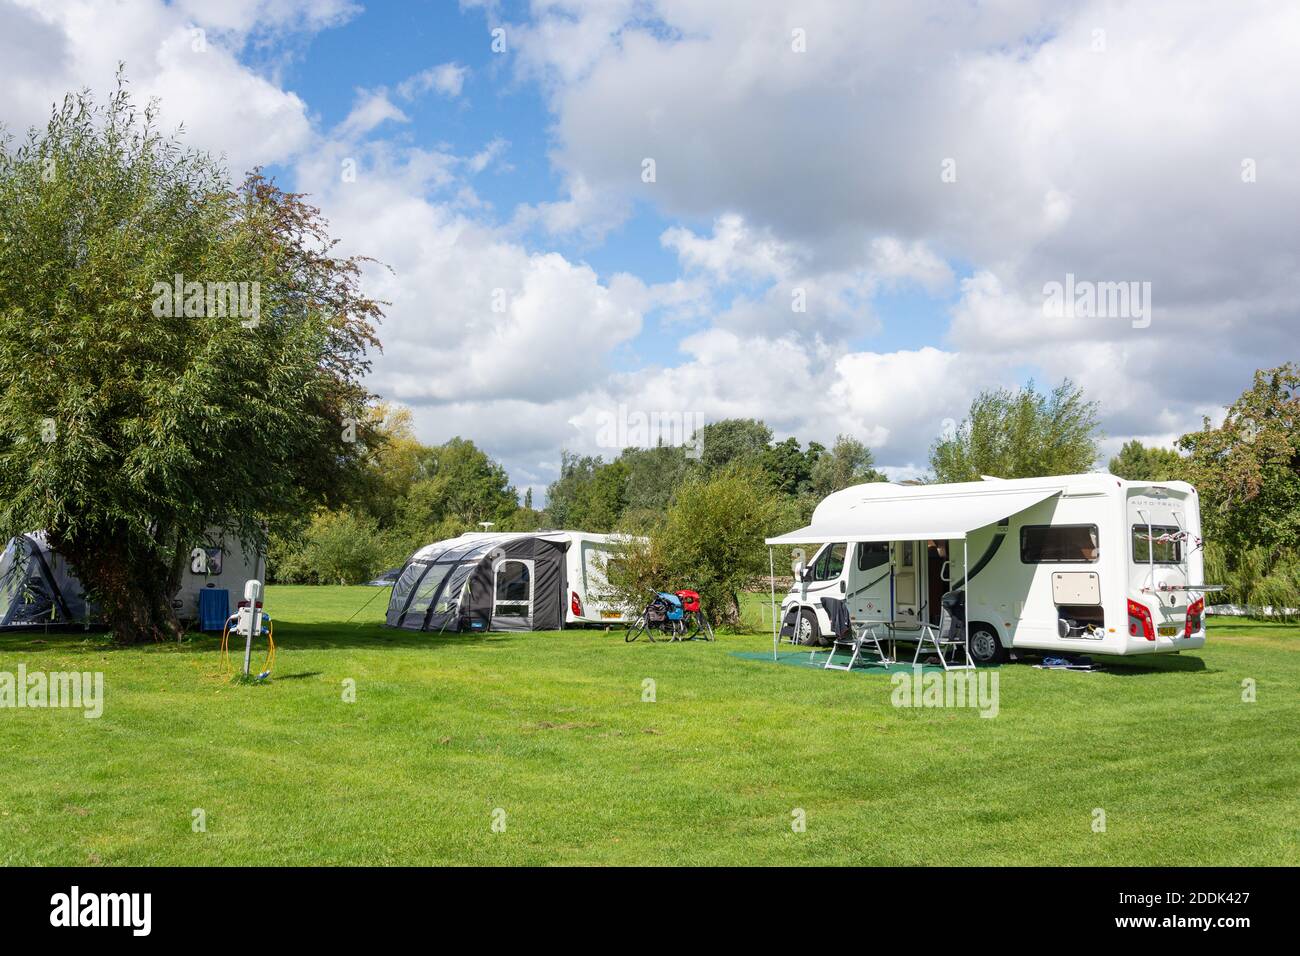 Campsite by River Thames, Clifton Hampden, Oxfordshire, England, United Kingdom Stock Photo